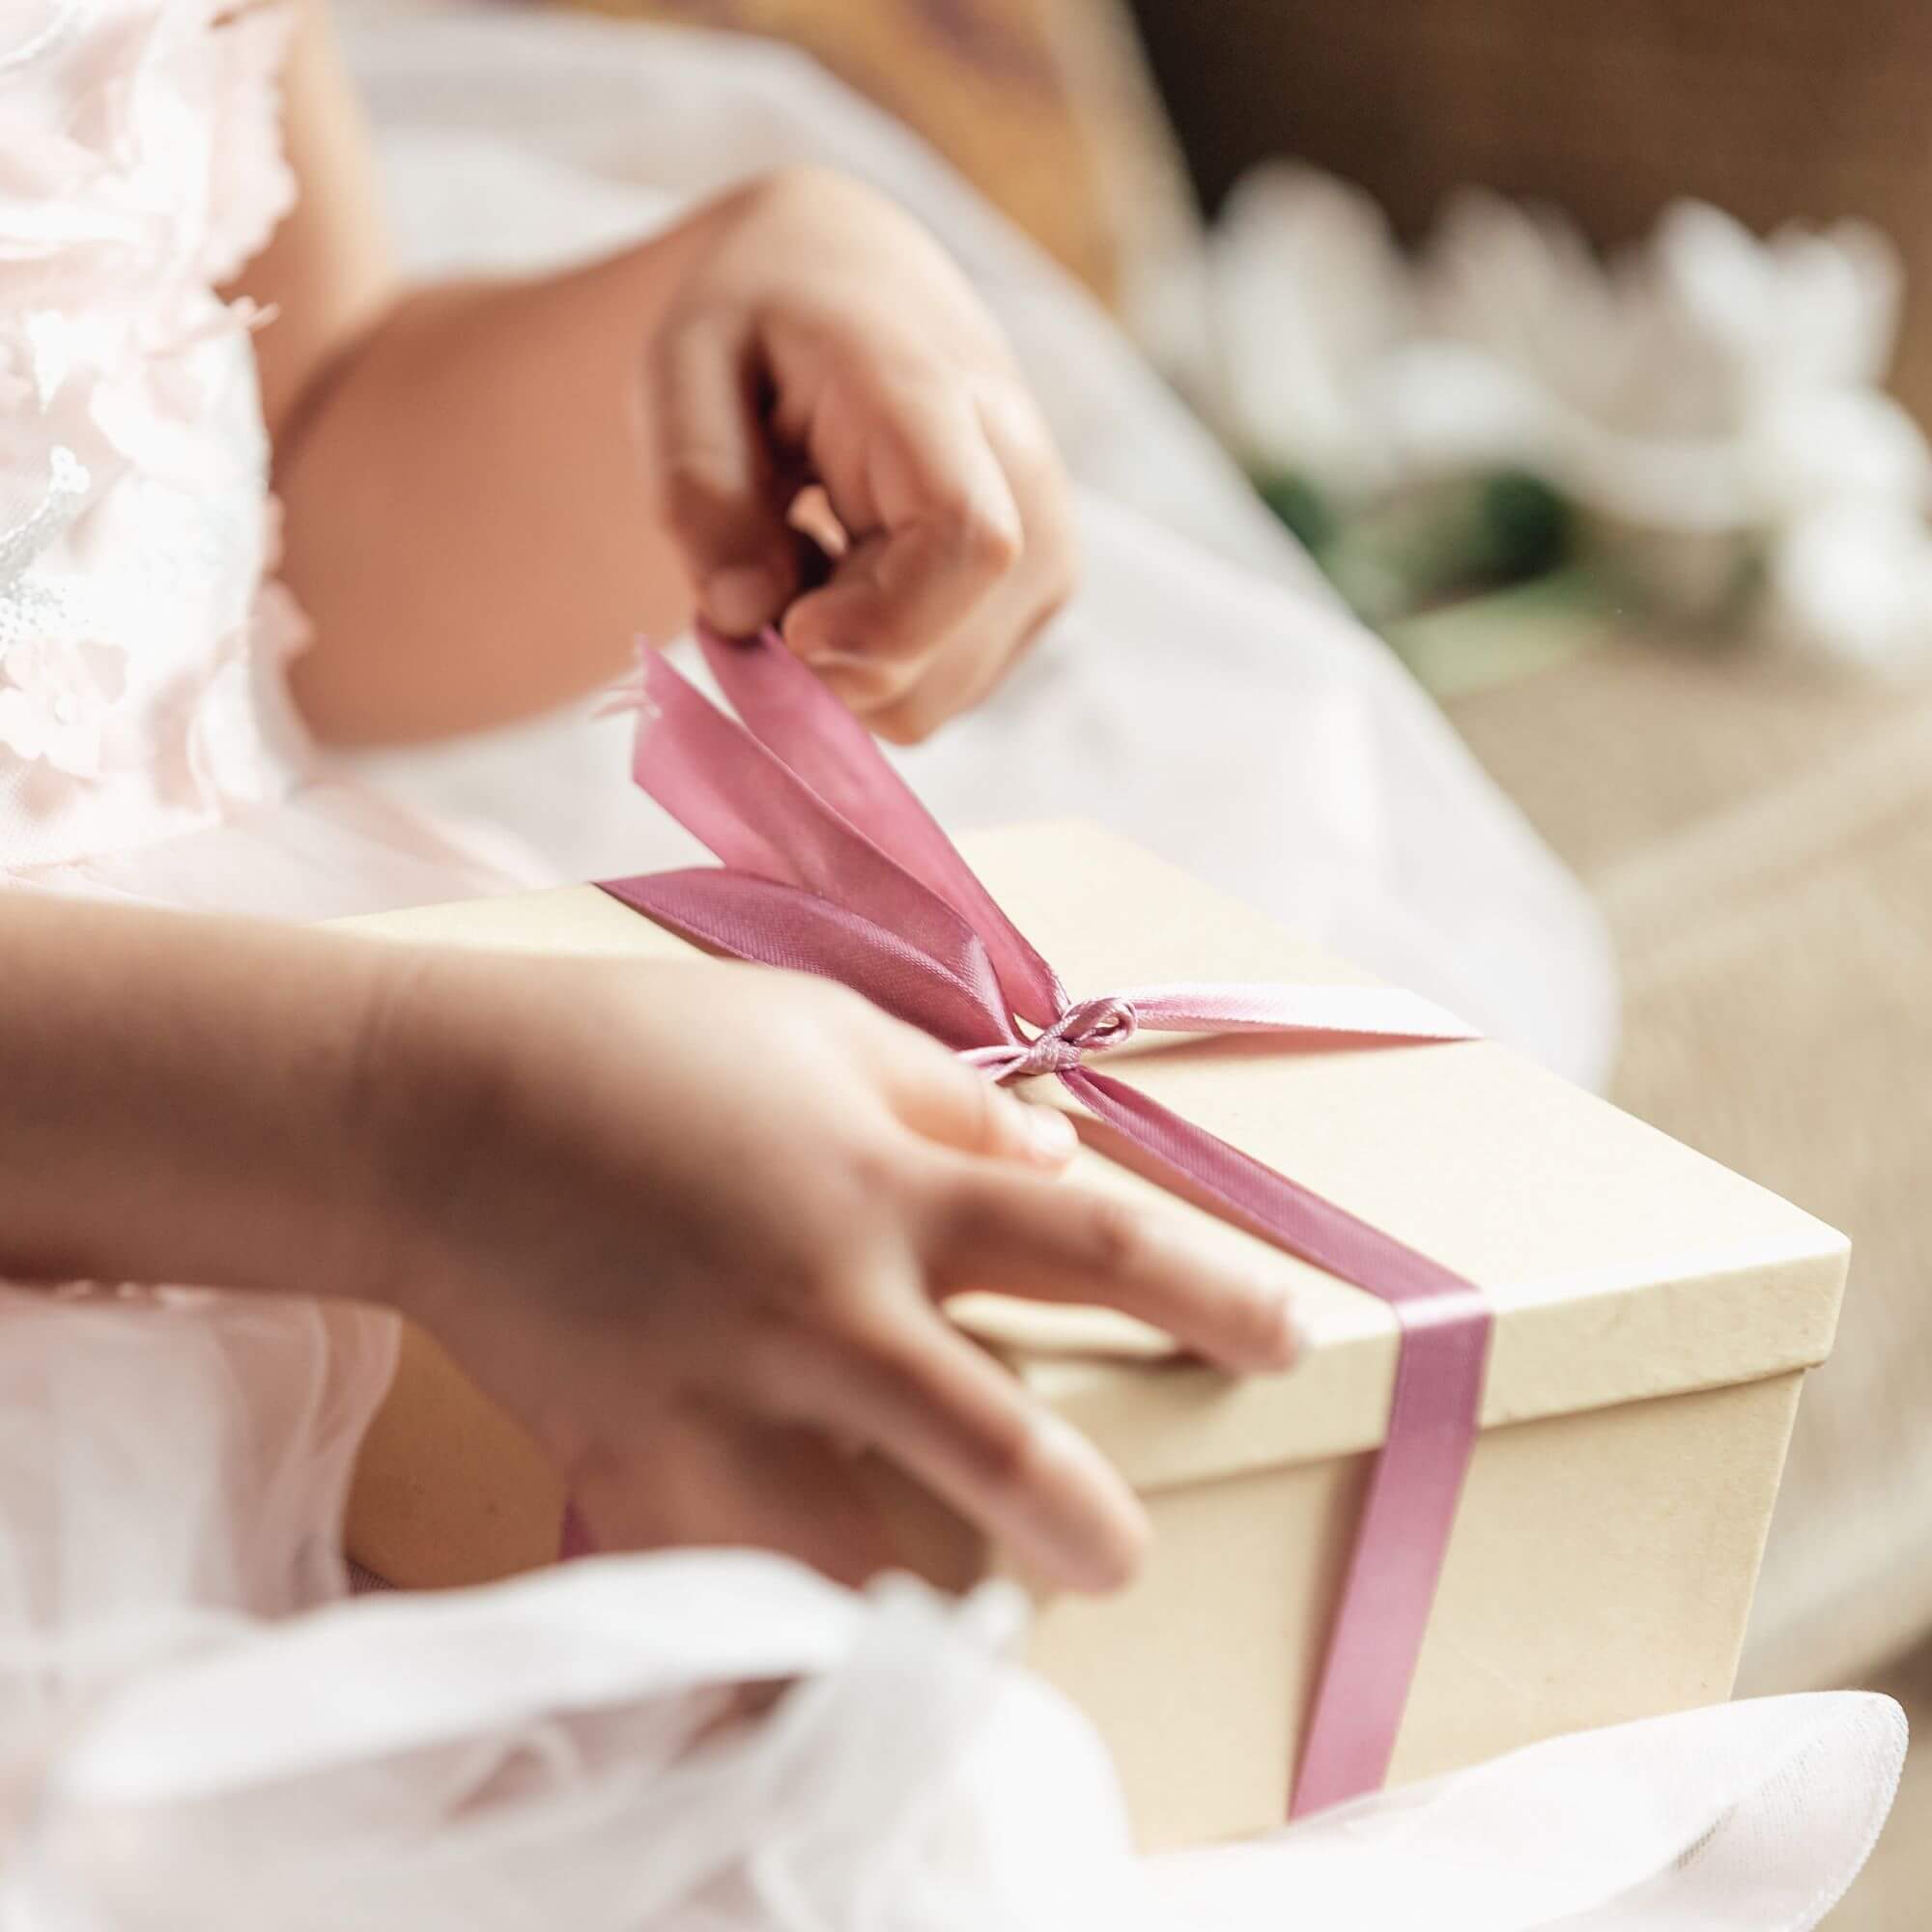 A child in a white dress opens a Christmas gift in a brown box and a pink ribbon.